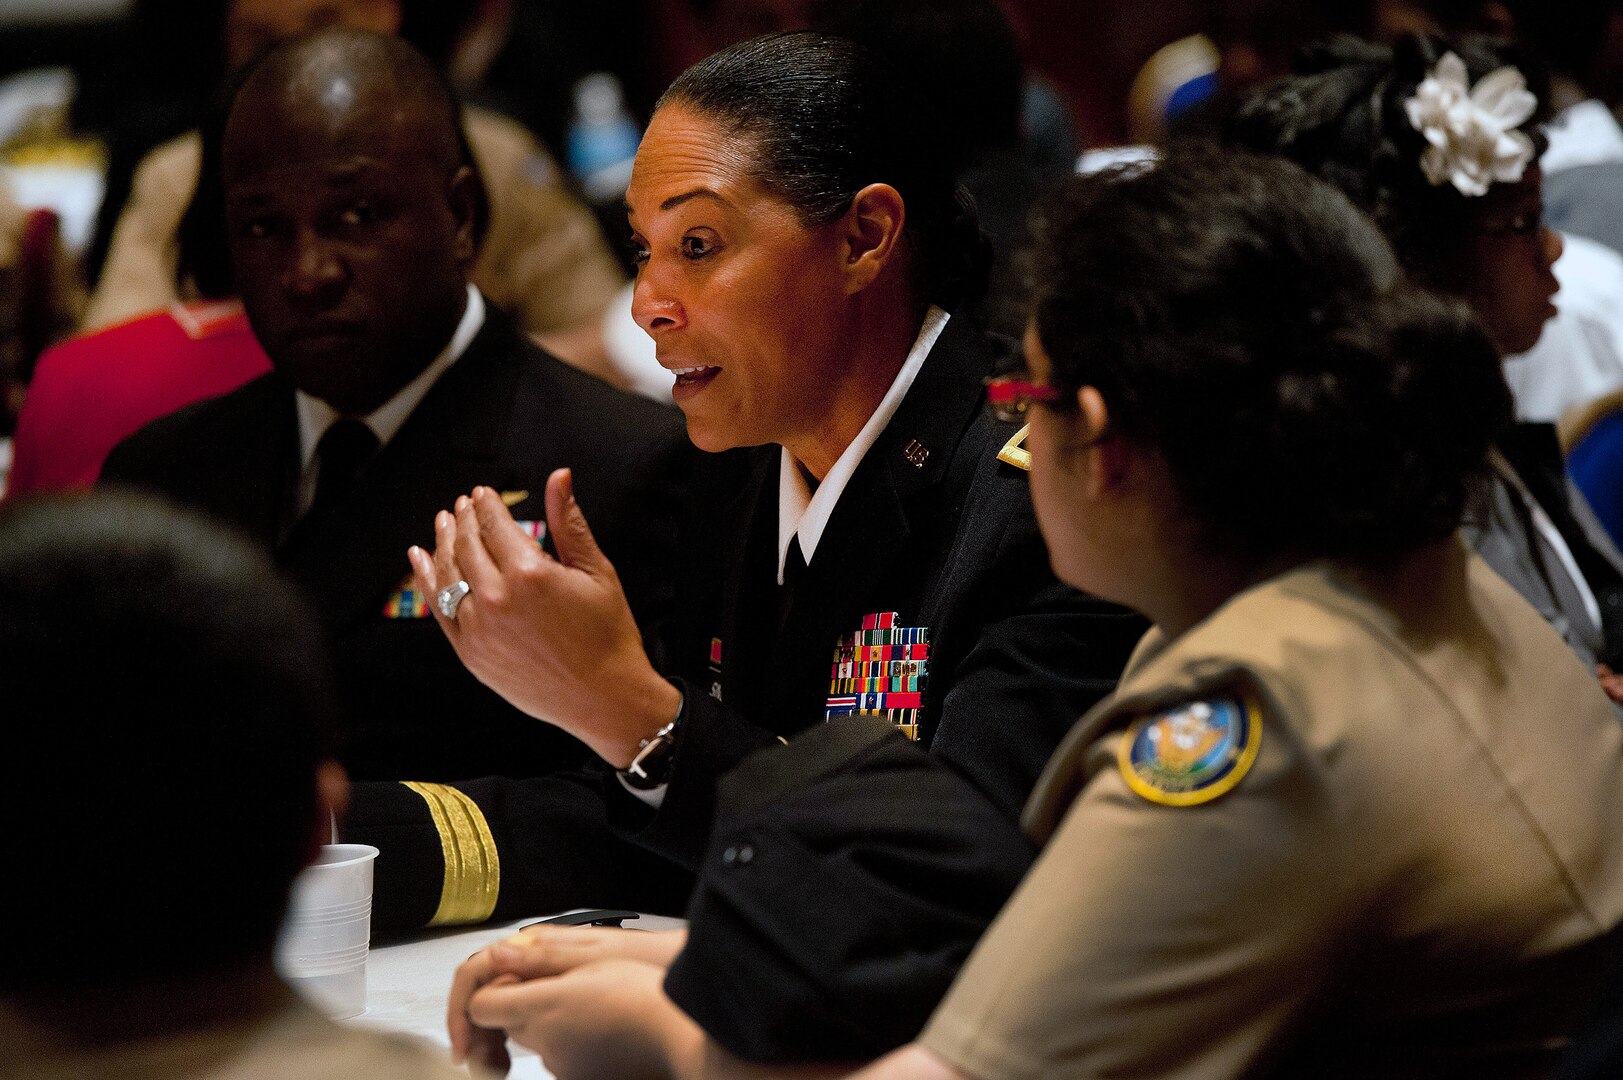 Army Brig. Gen. Linda Singh, the assistant adjutant general-Army with the Maryland National Guard, speaks with high school students during a youth mentorship in Washington, D.C., Feb. 7, 2014. The event was designed to foster a greater interest in science, technology, engineering and math among high school students--specifically minority students--and featured many senior military officials who spoke about their experiences and how science and technology impacted their lives.